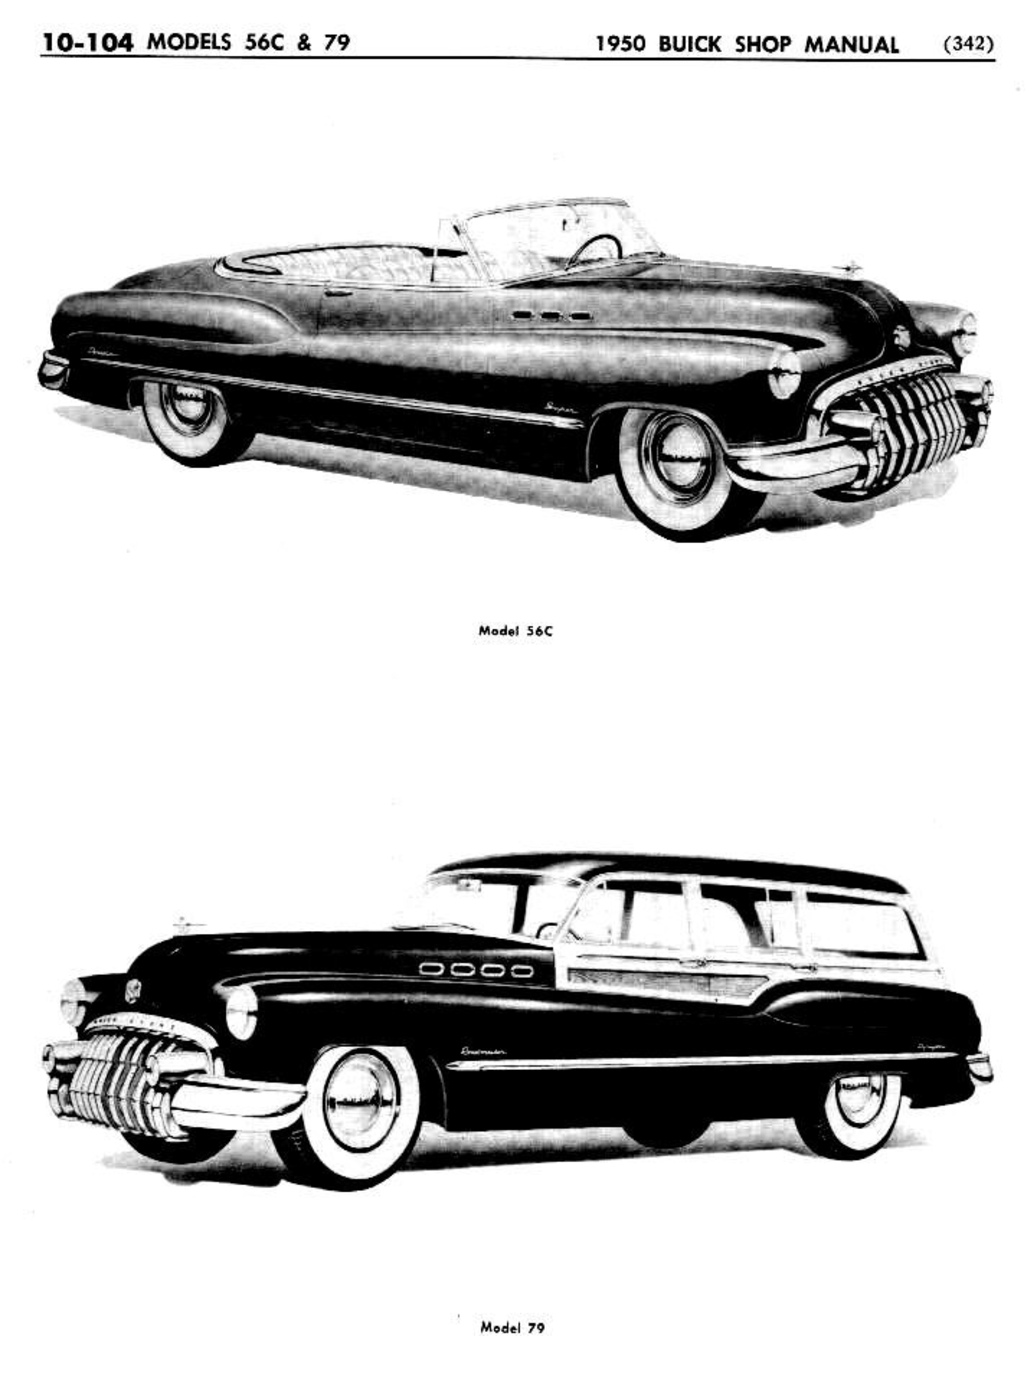 n_11 1950 Buick Shop Manual - Electrical Systems-104-104.jpg